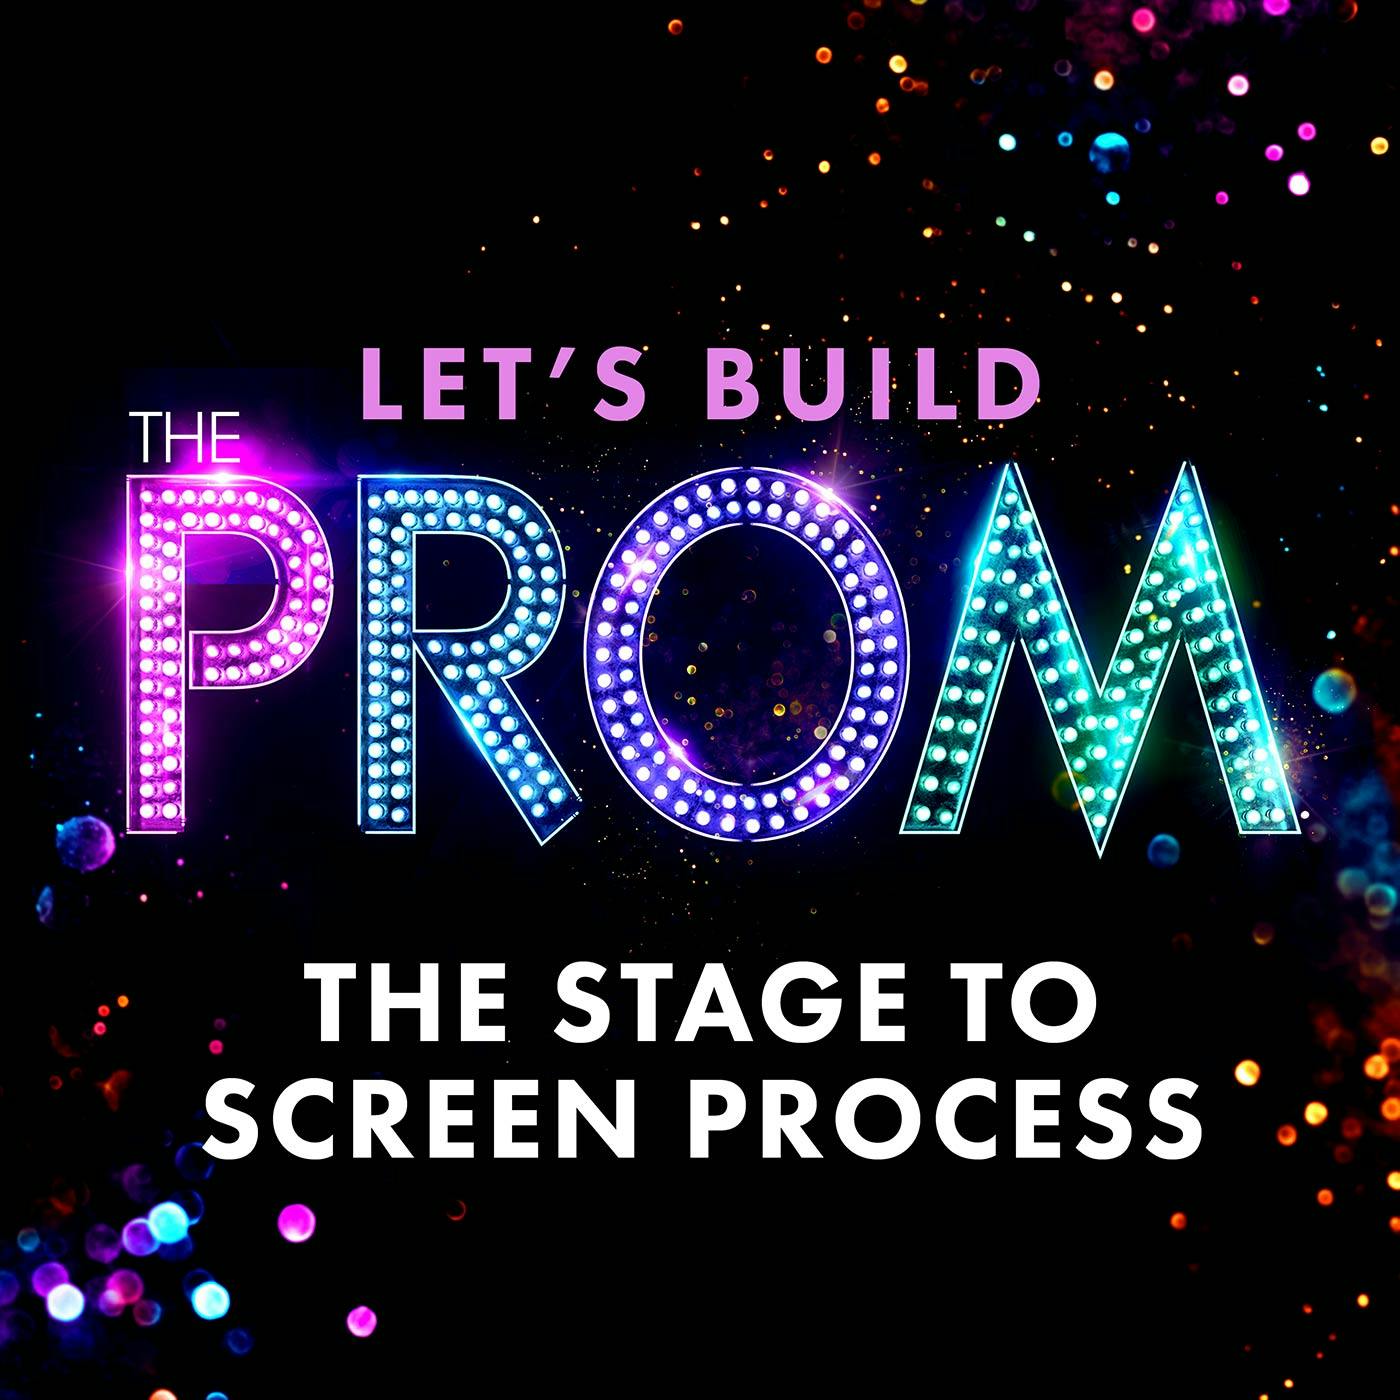 The Stage to Screen Process